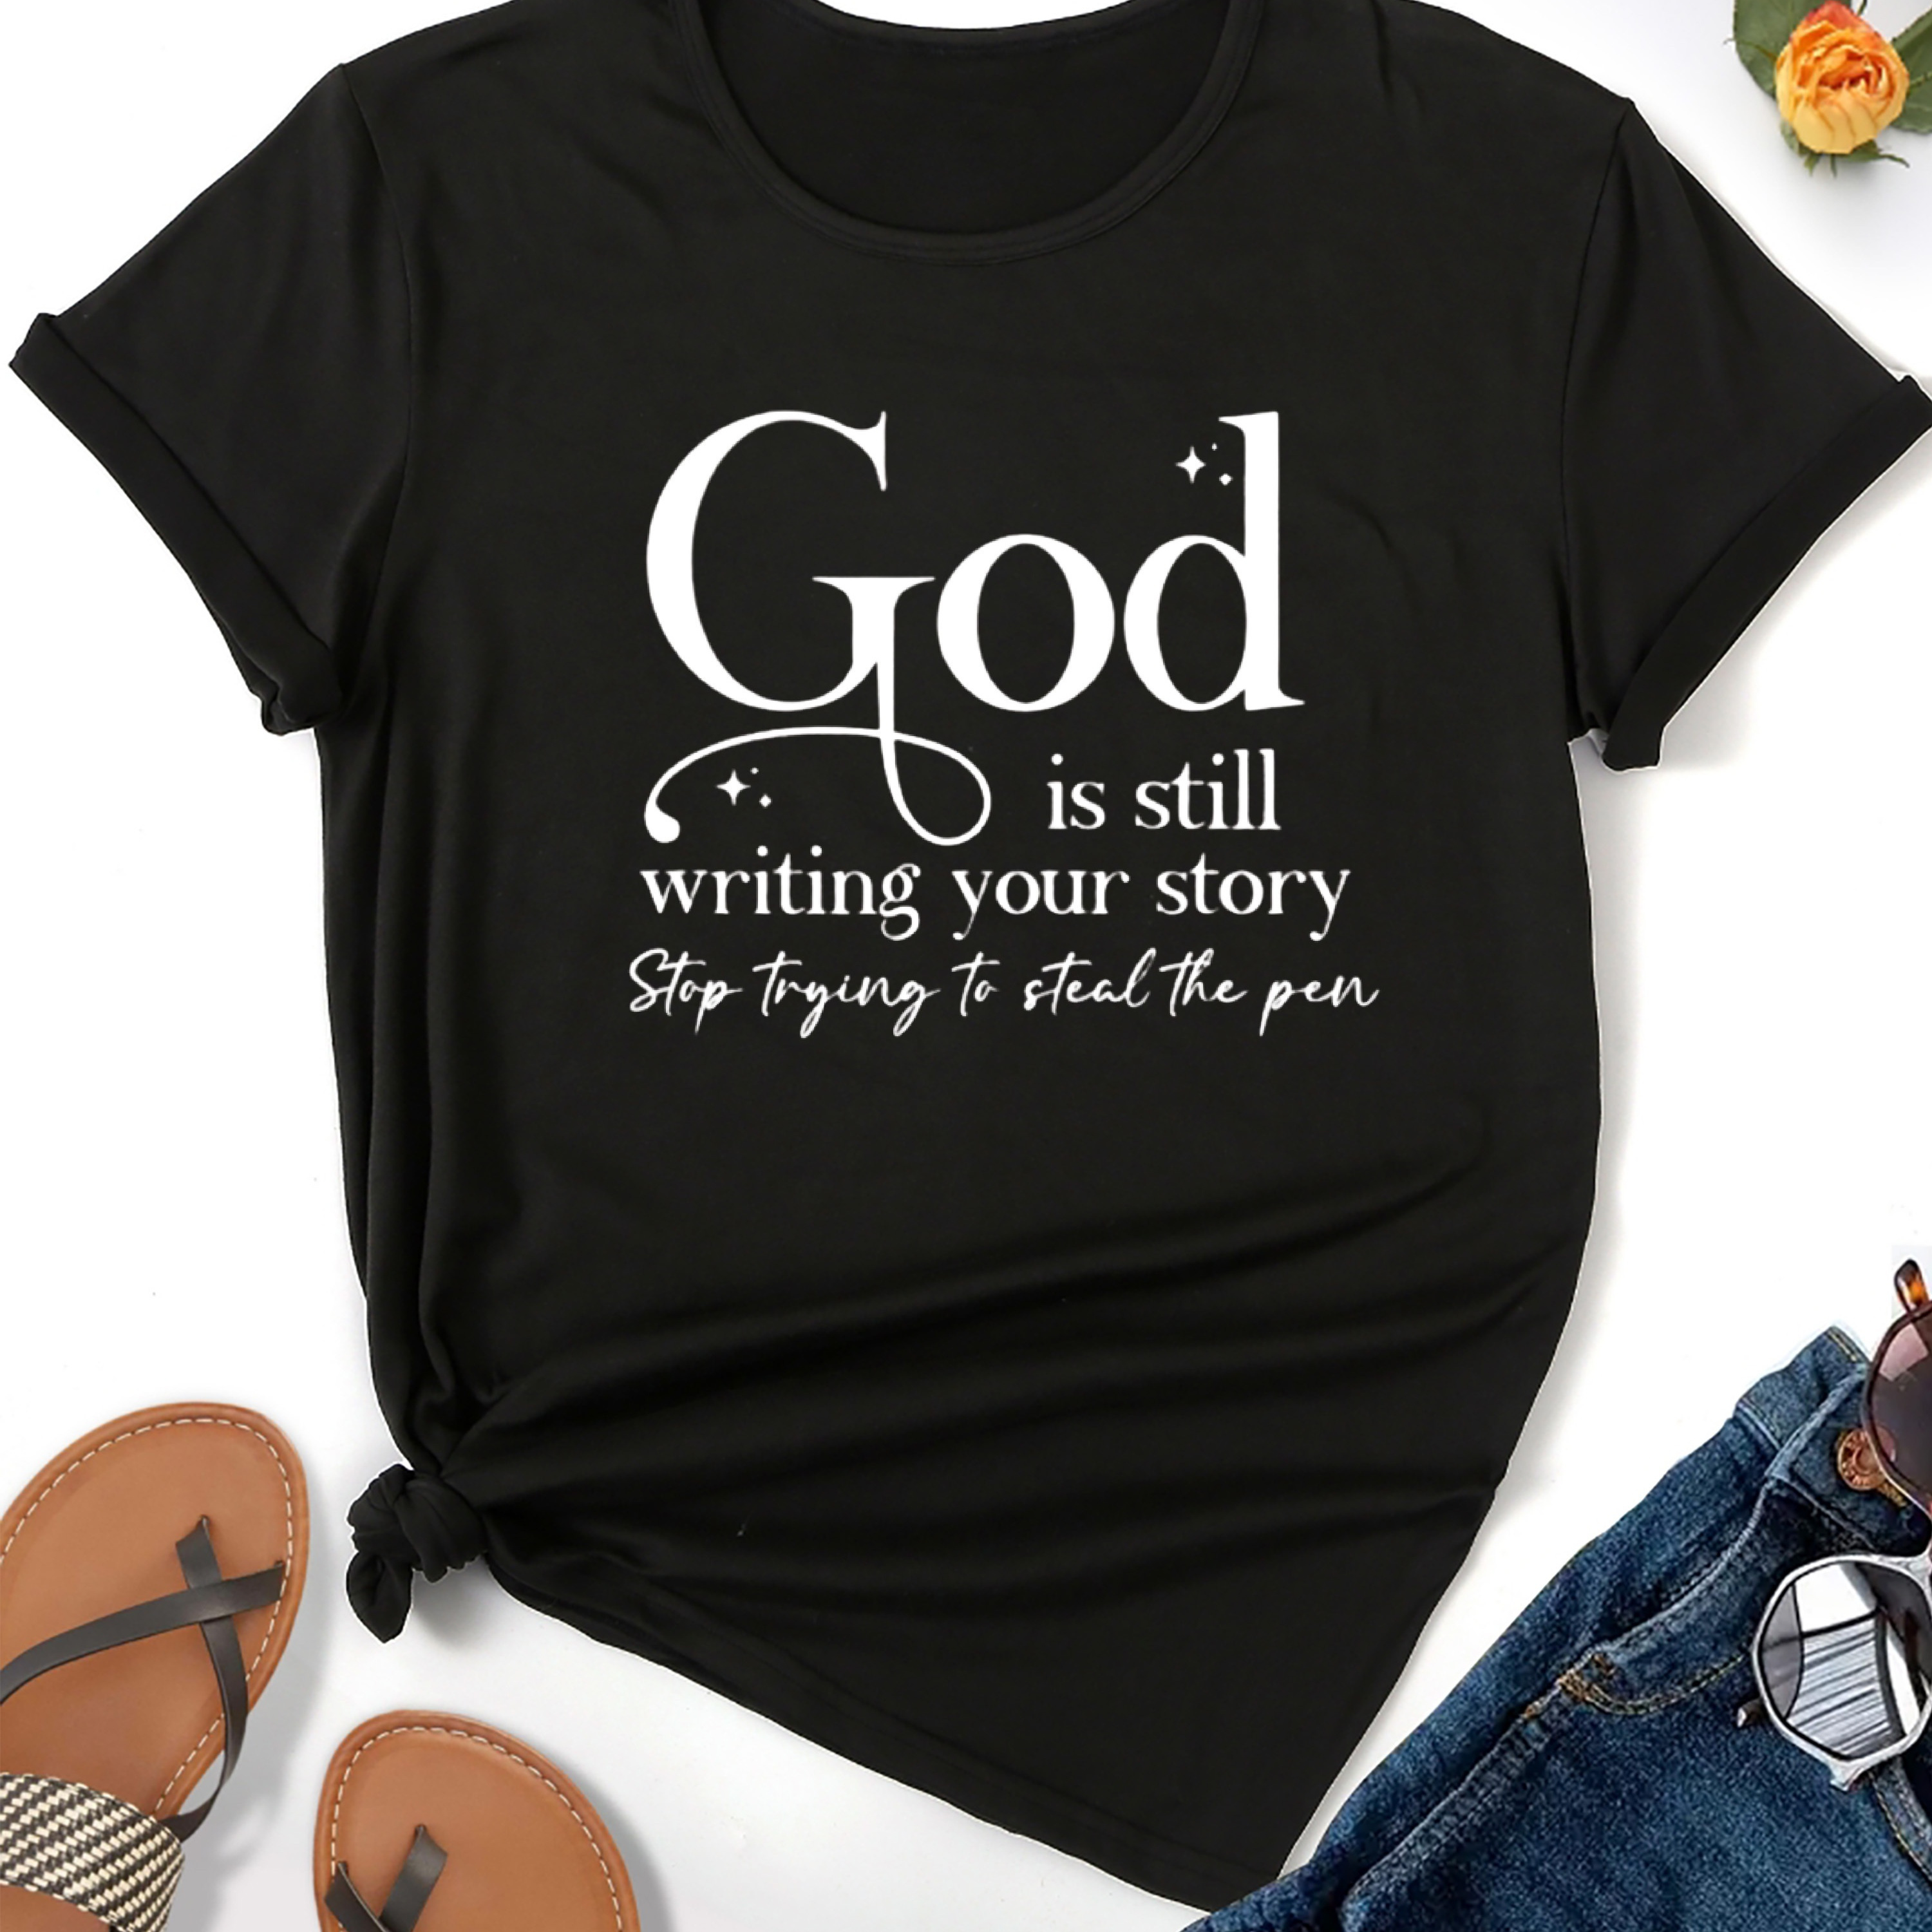 

God Letter Print T-shirt, Casual Short Sleeve Crew Neck Top For Spring & Summer, Women's Clothing